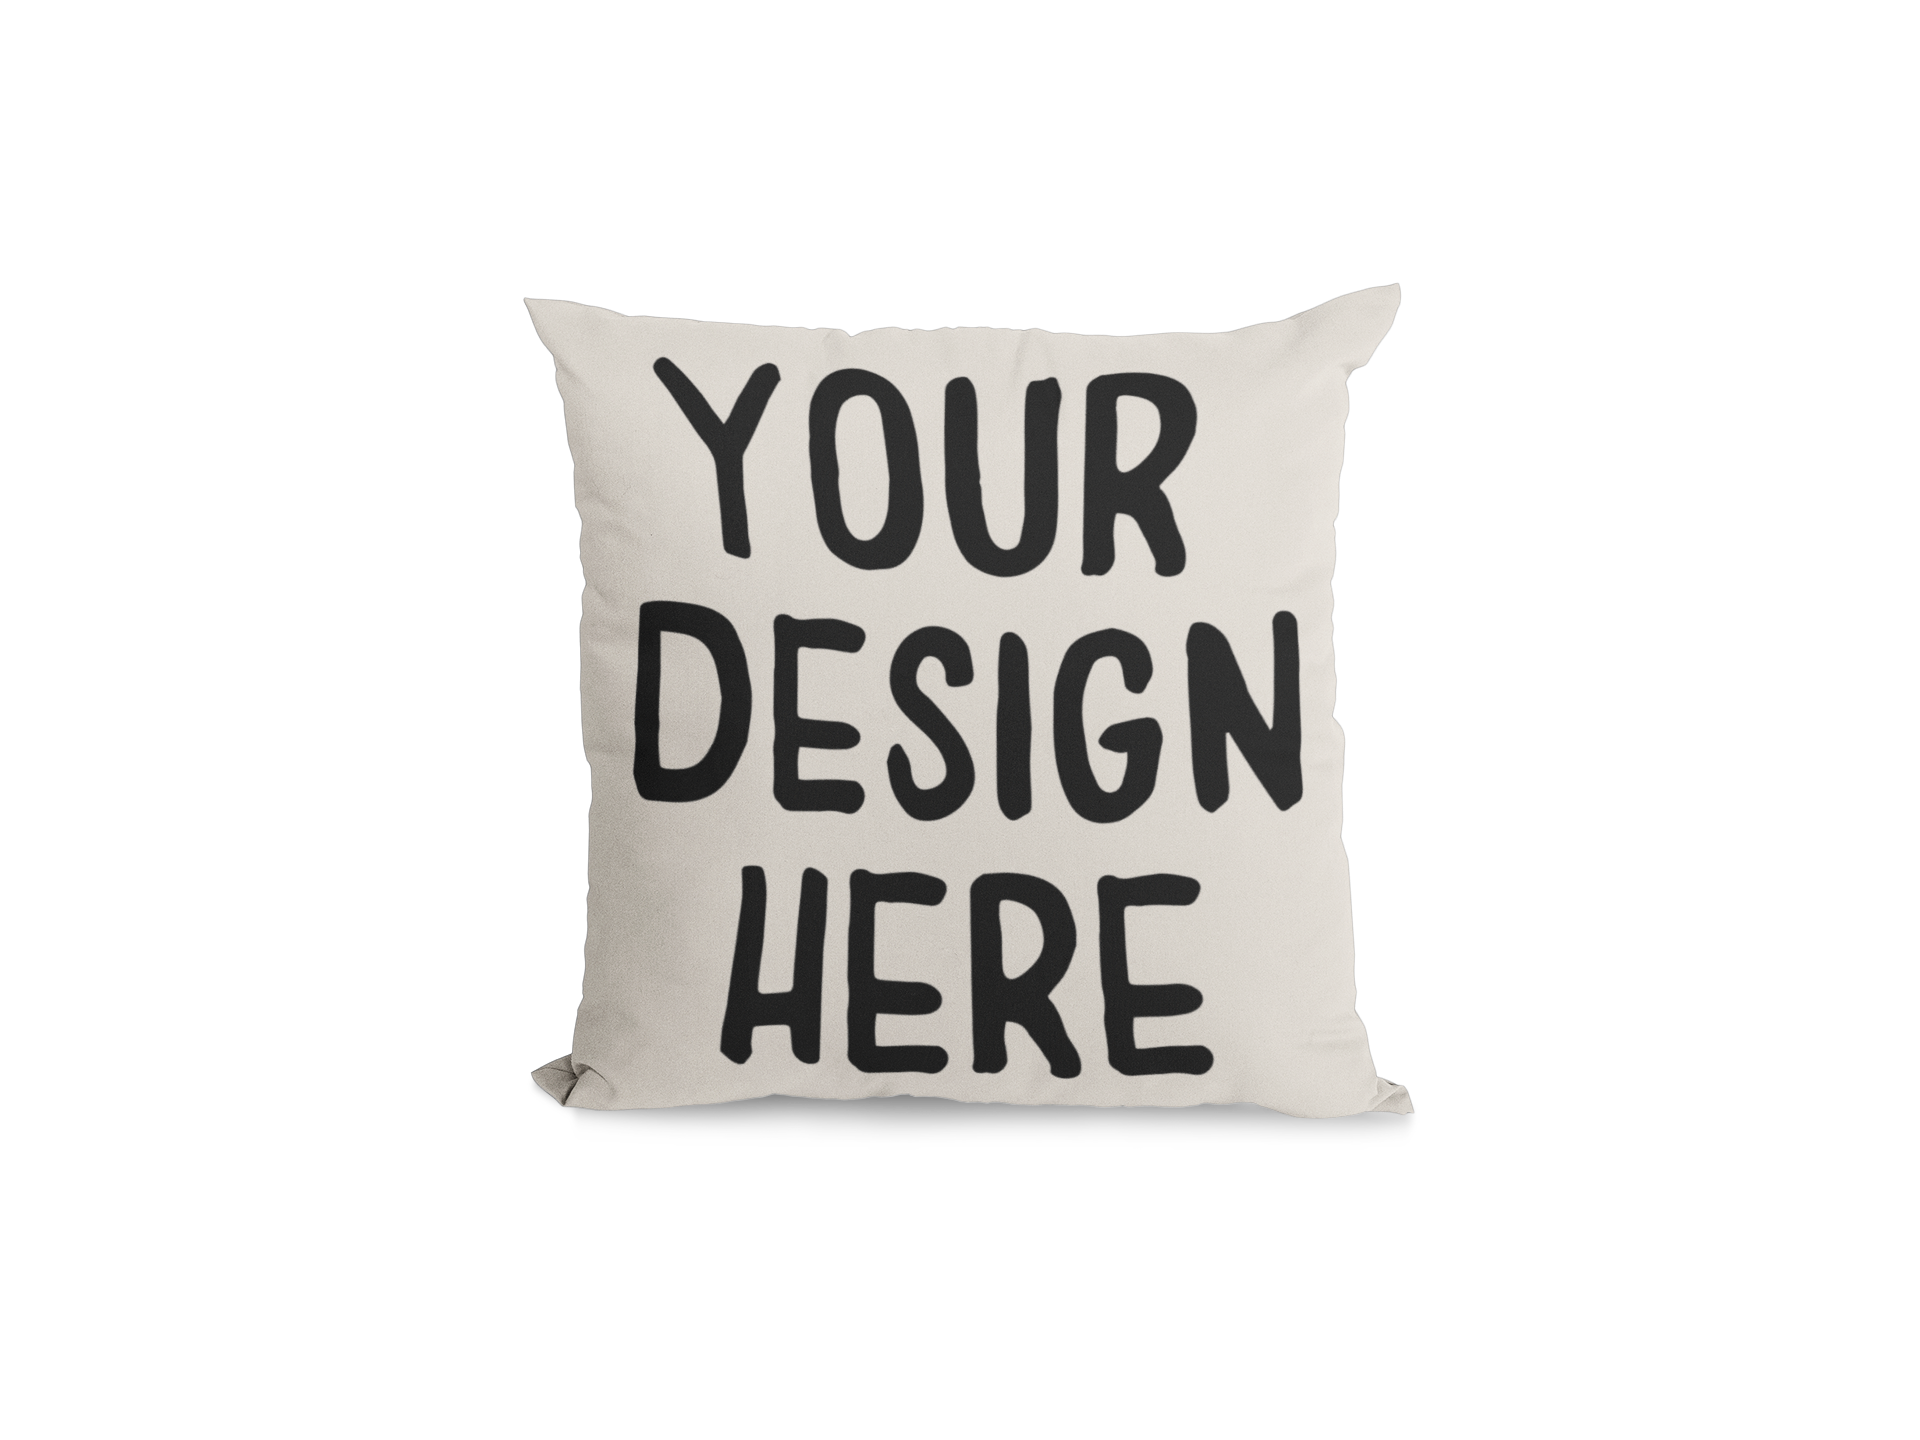 Design your own pillow